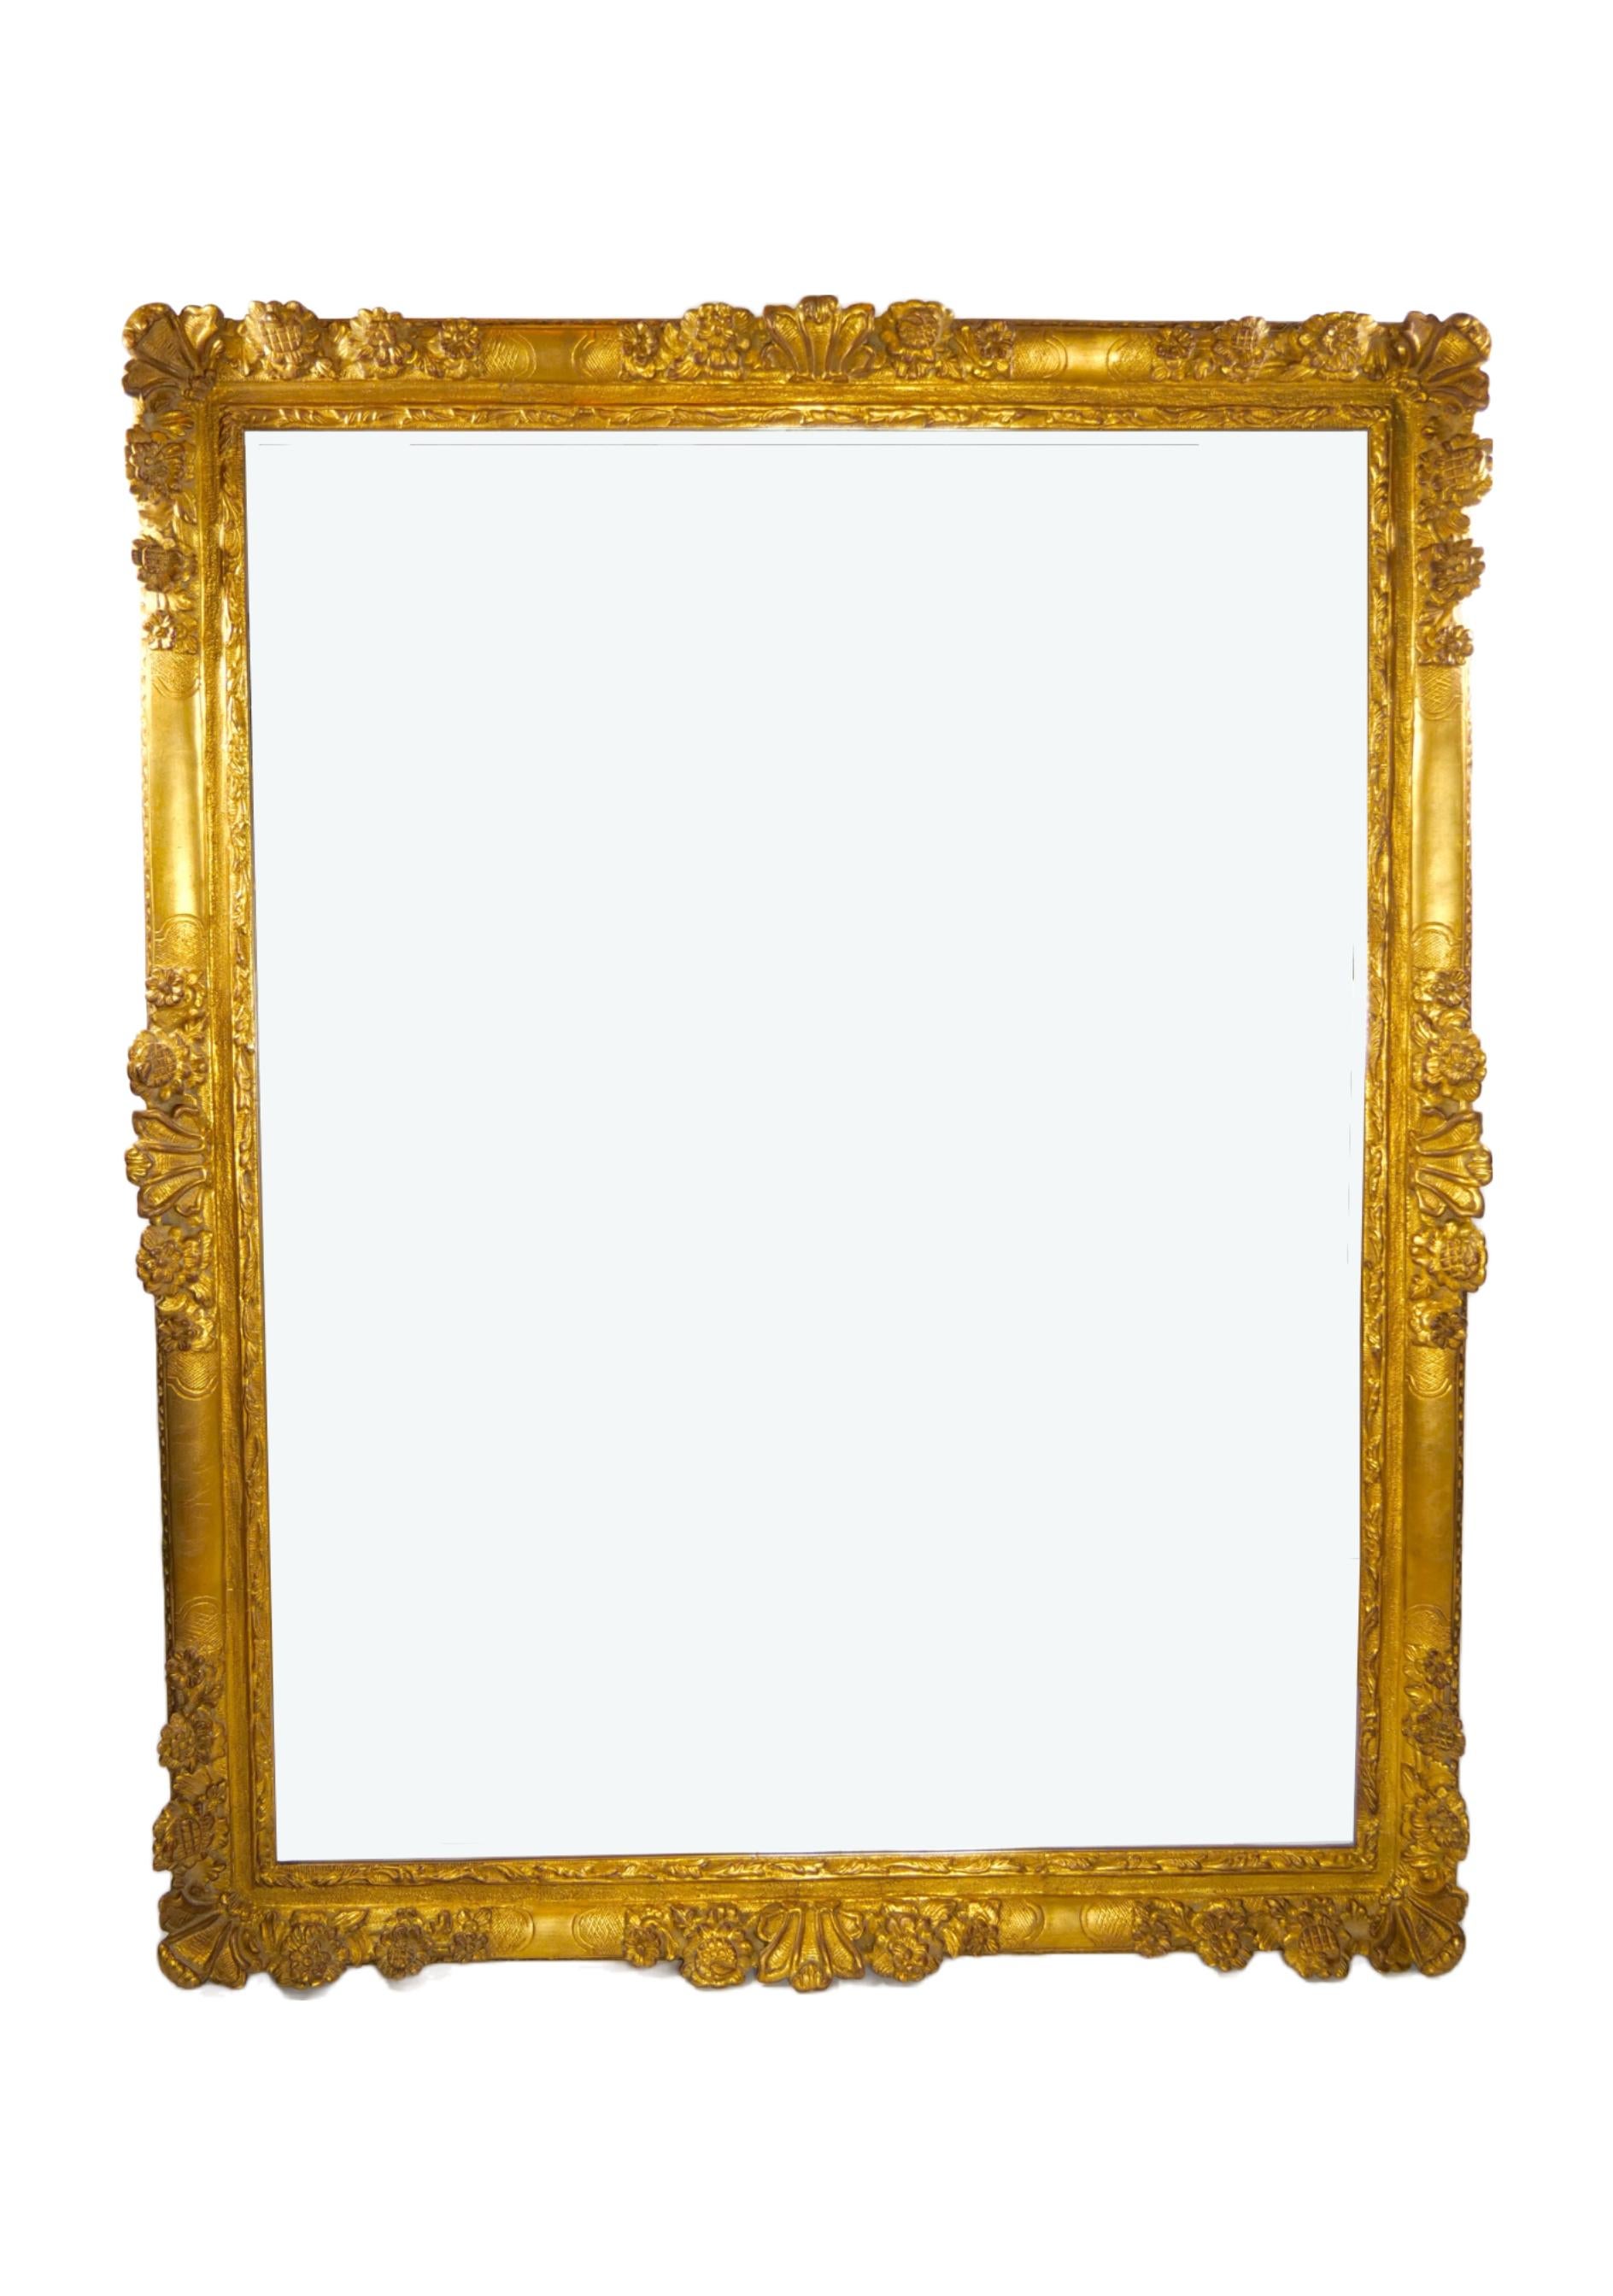 Large Louis XVI Style Gilt Wood Frame Hanging Wall Mirror For Sale 4